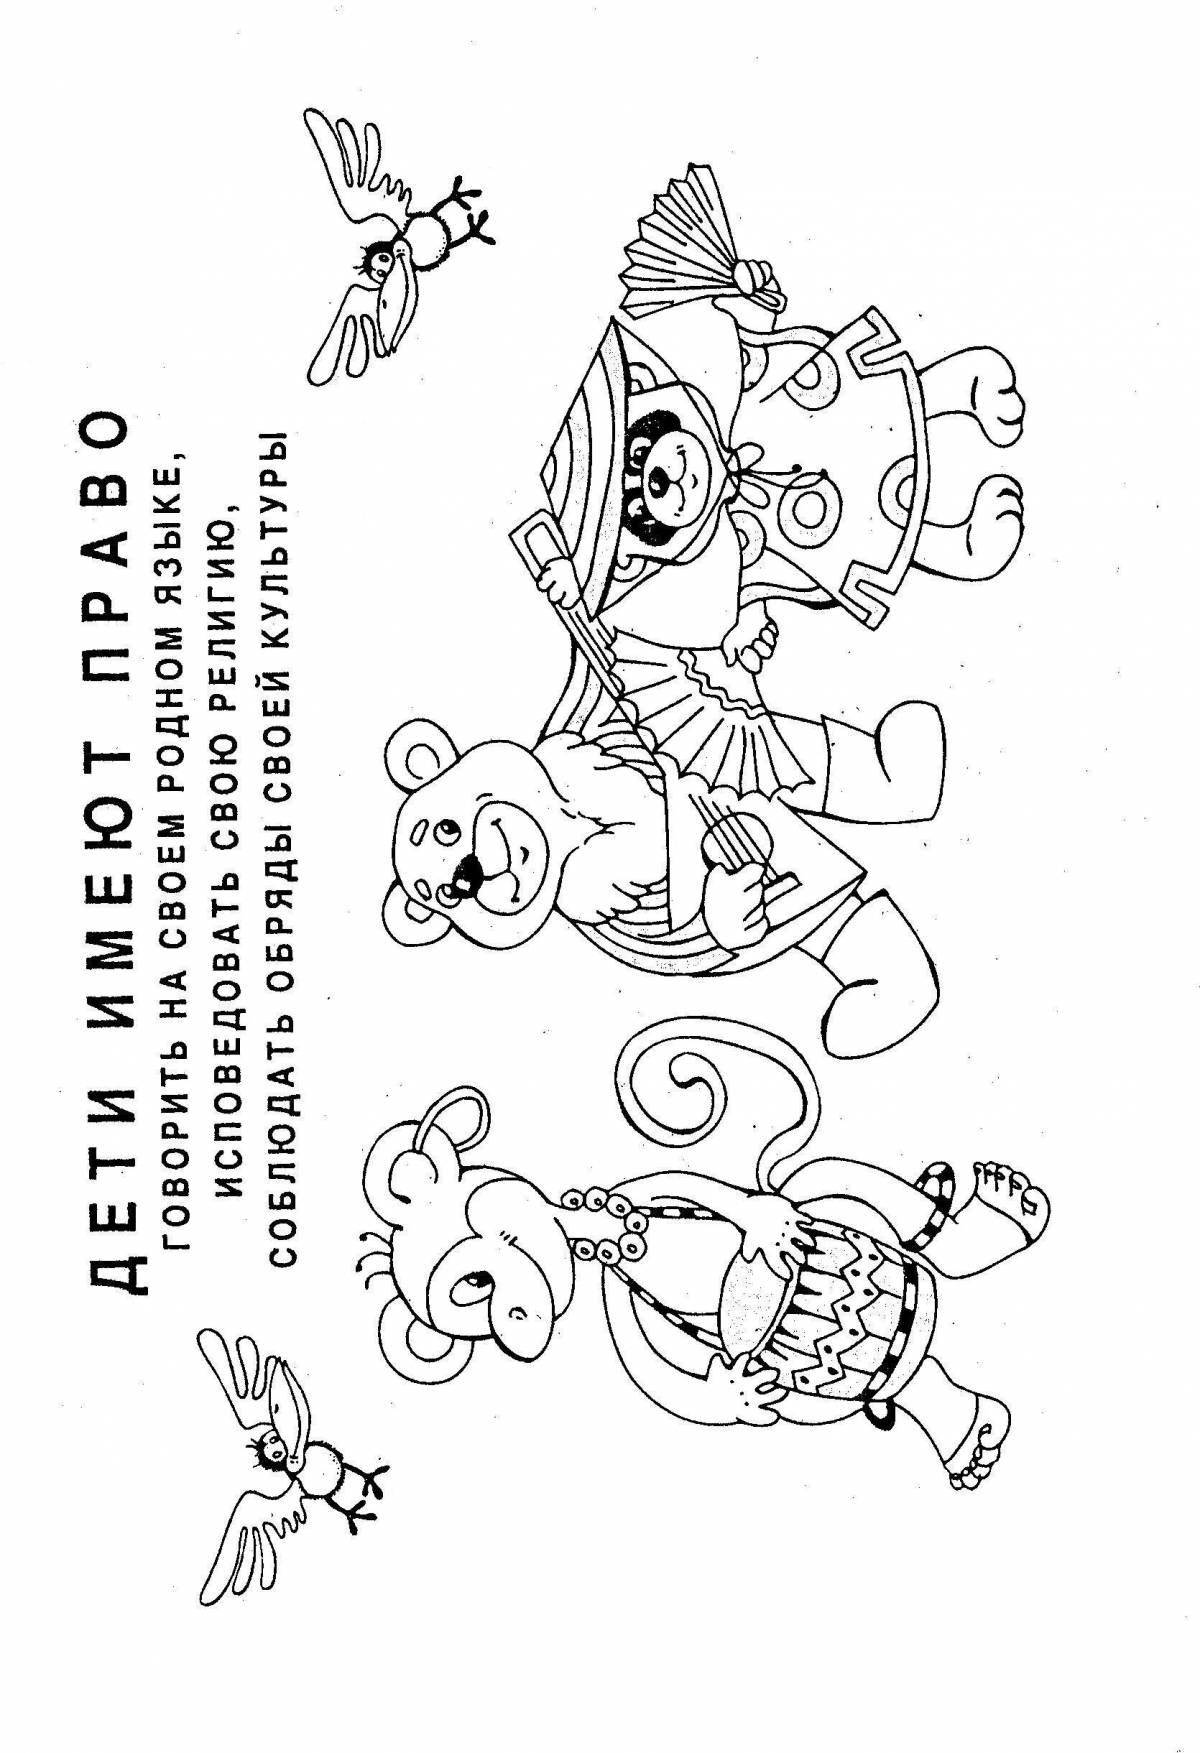 Fun coloring page my rights and obligations for children